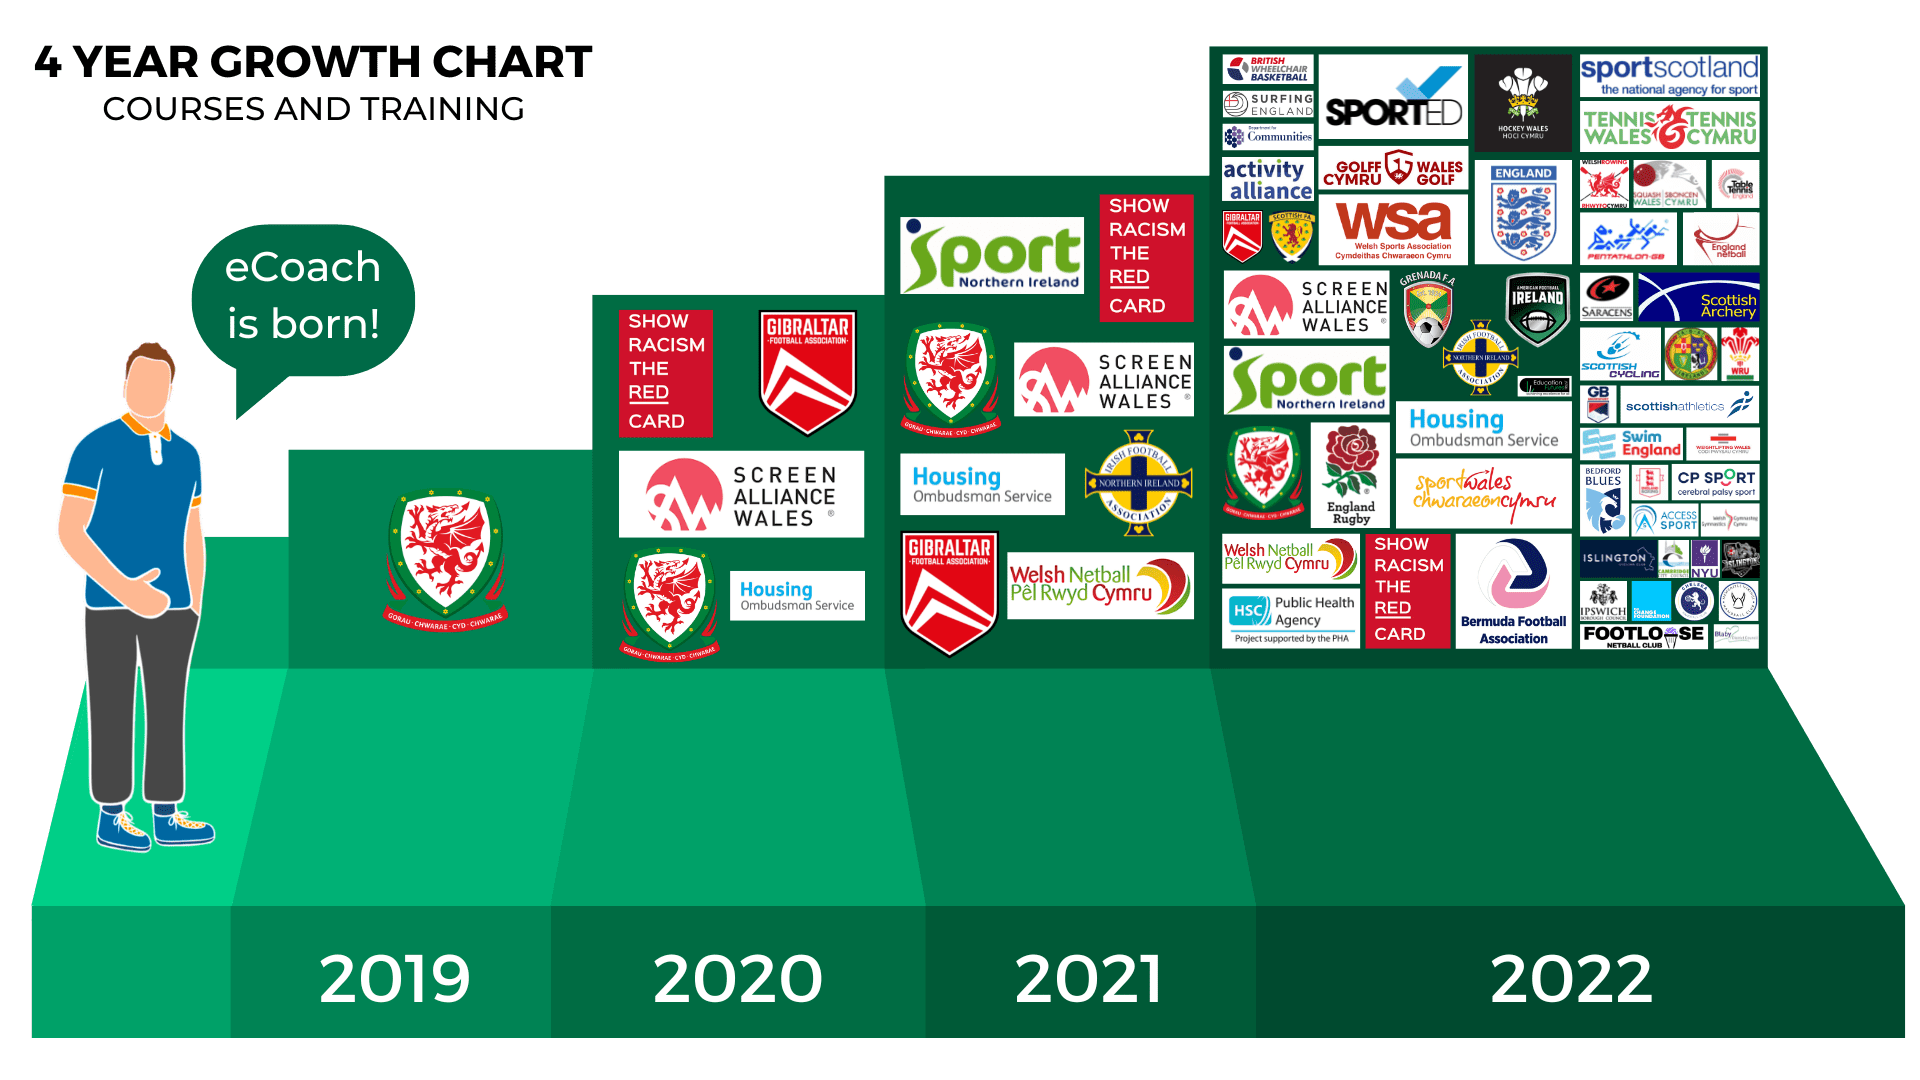 eLearning chart for eCoach in 2022